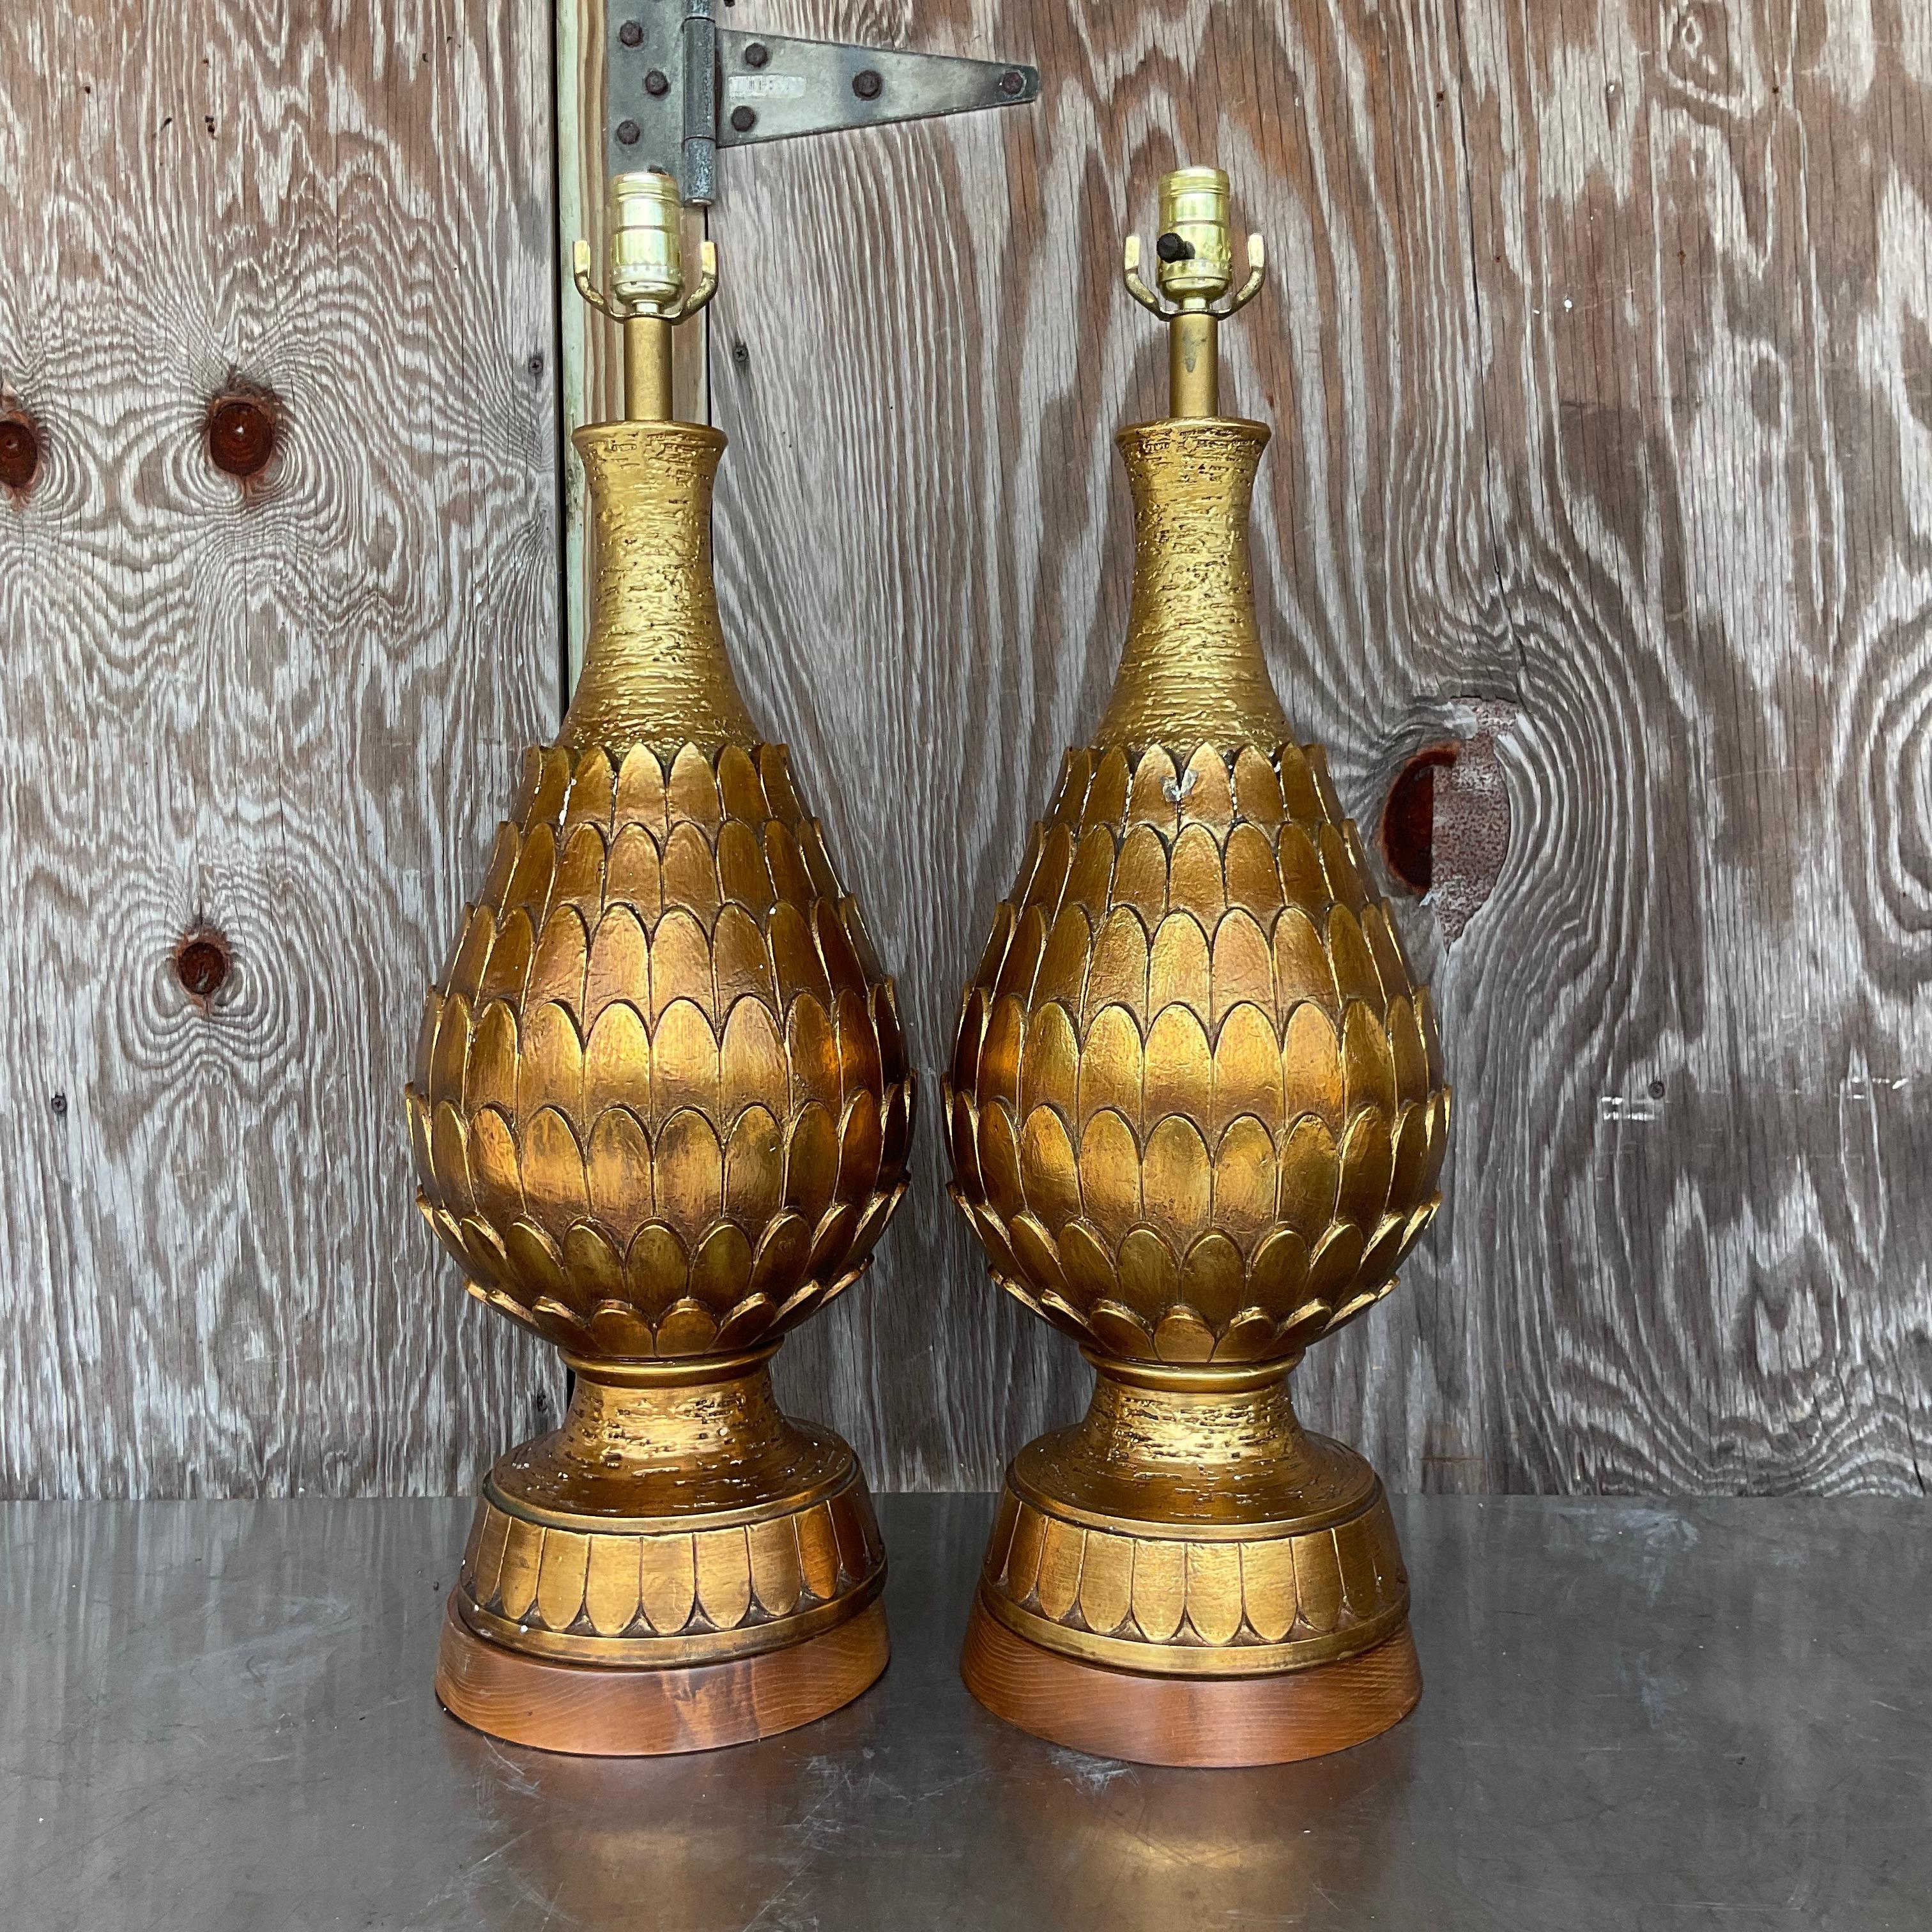 A fabulous pair of vintage MCM table lamps. A chic gilt finish on a period artichoke design. Tall and impressive. Acquired from a NY estate.